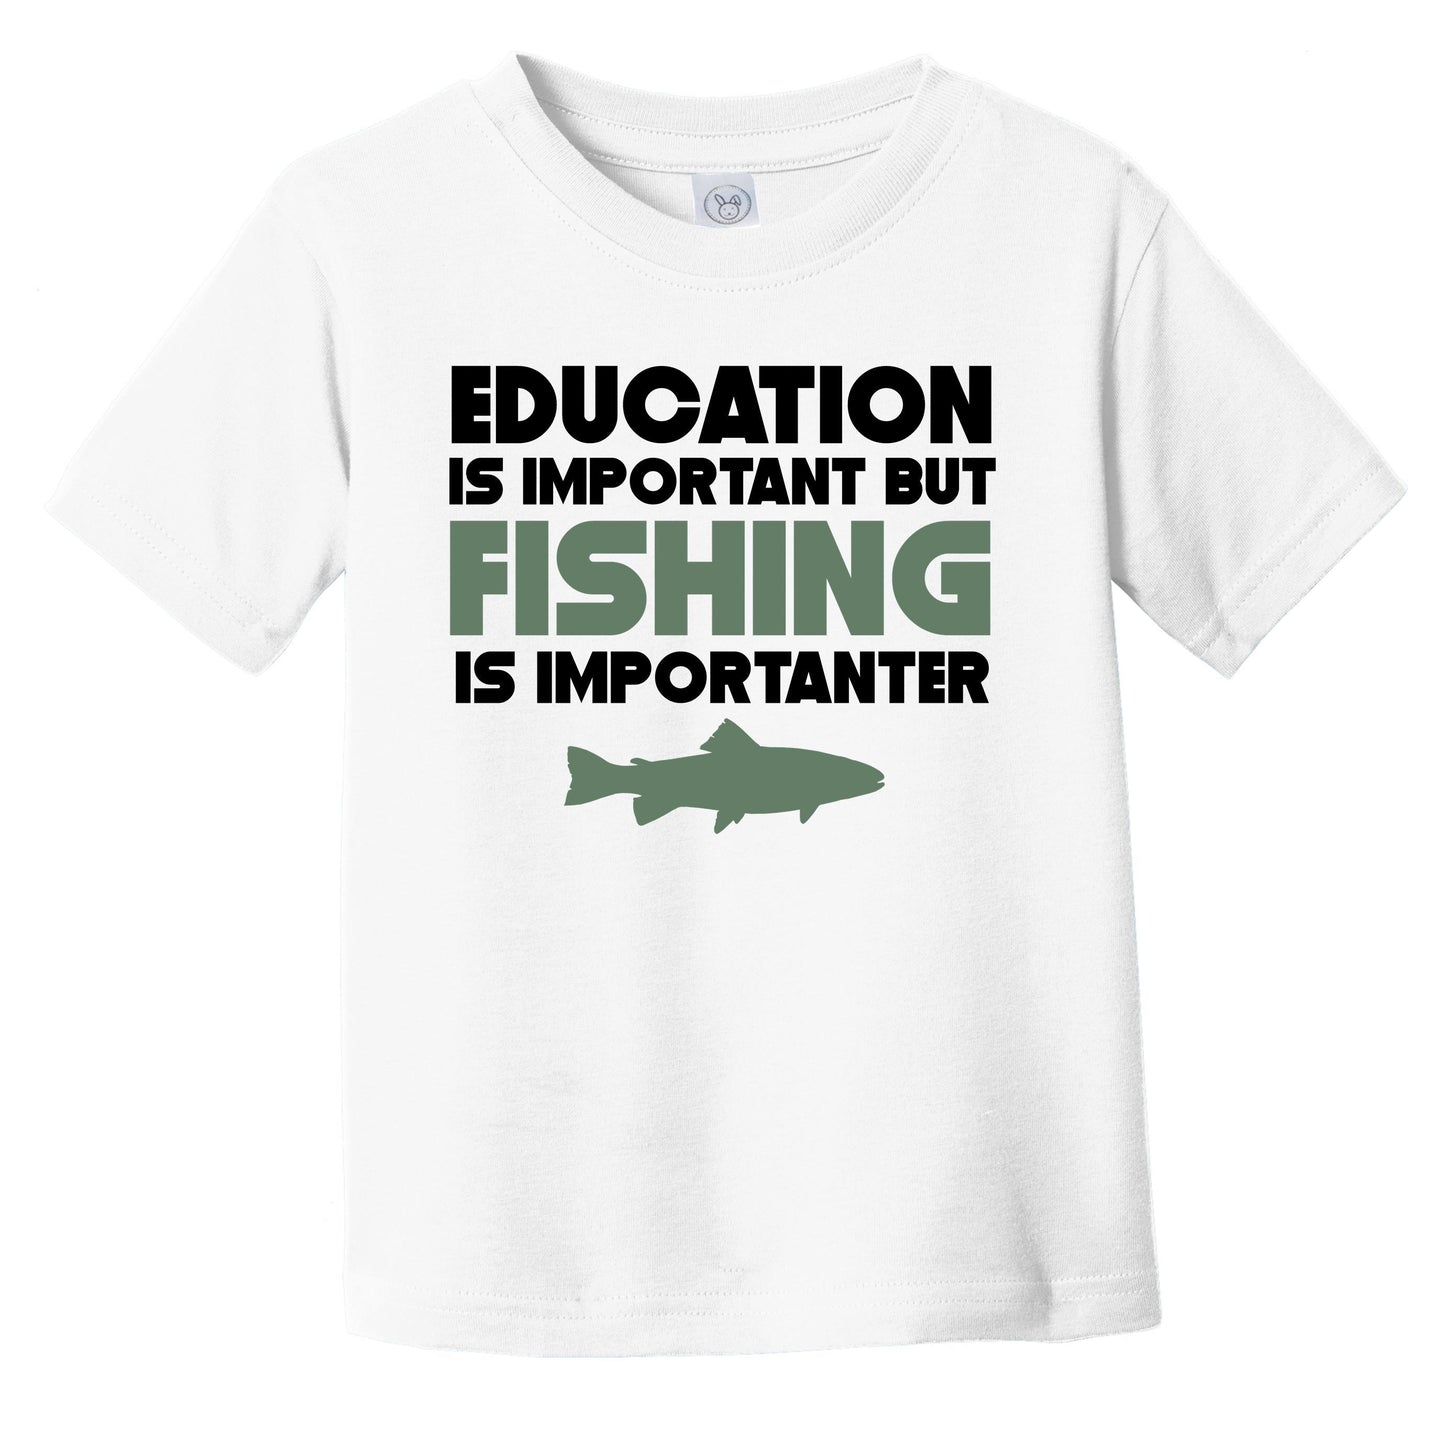 Education Is Important But Fishing Is Importanter Funny Infant Toddler T-Shirt